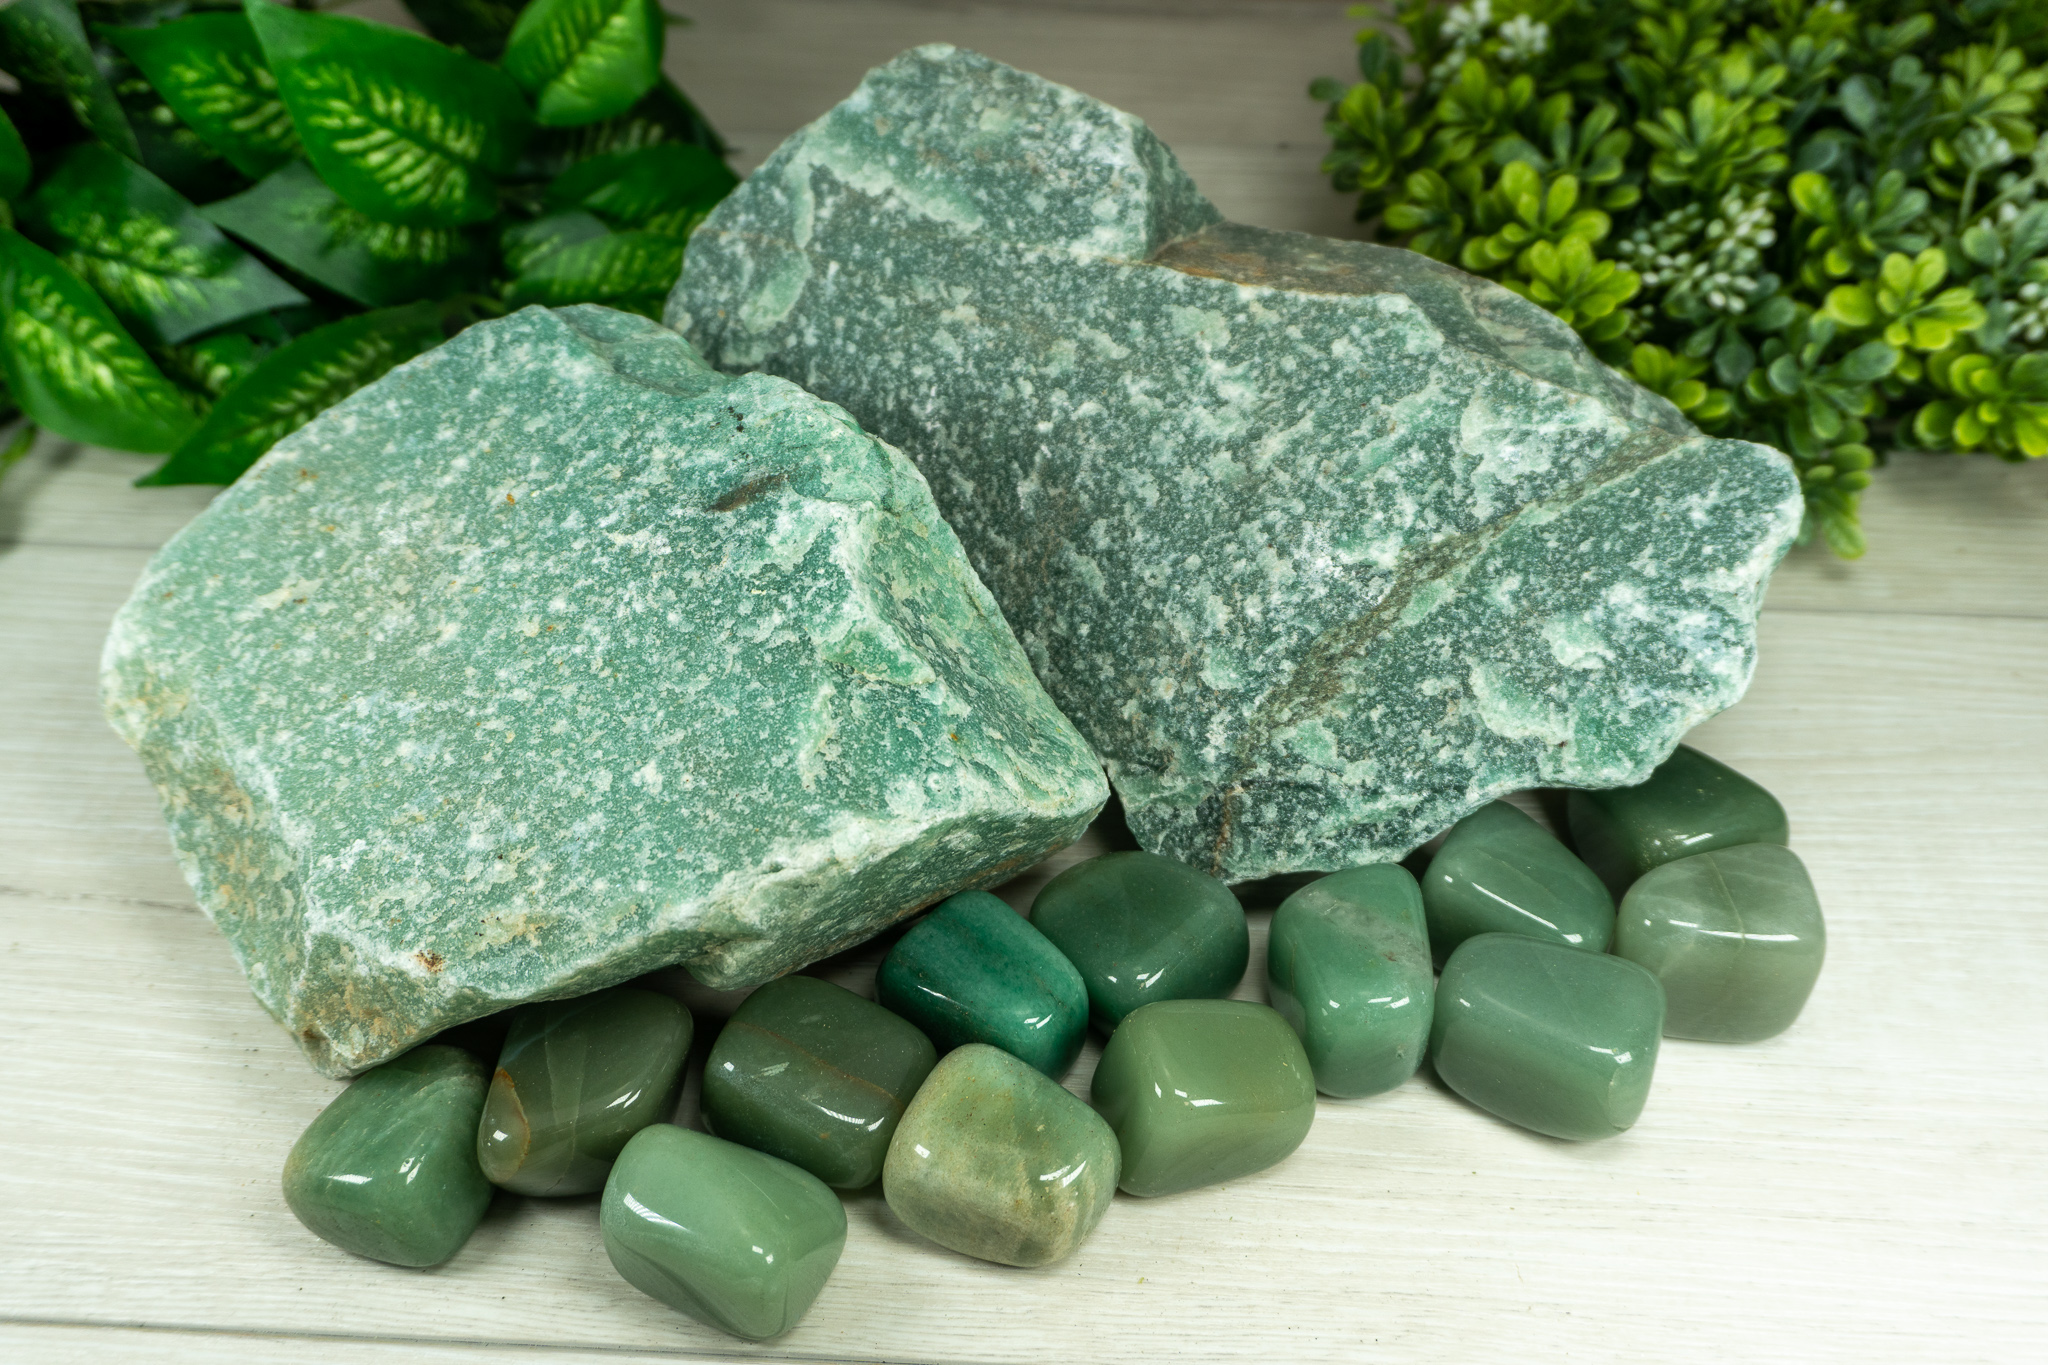 Green Aventurine crystals and stones